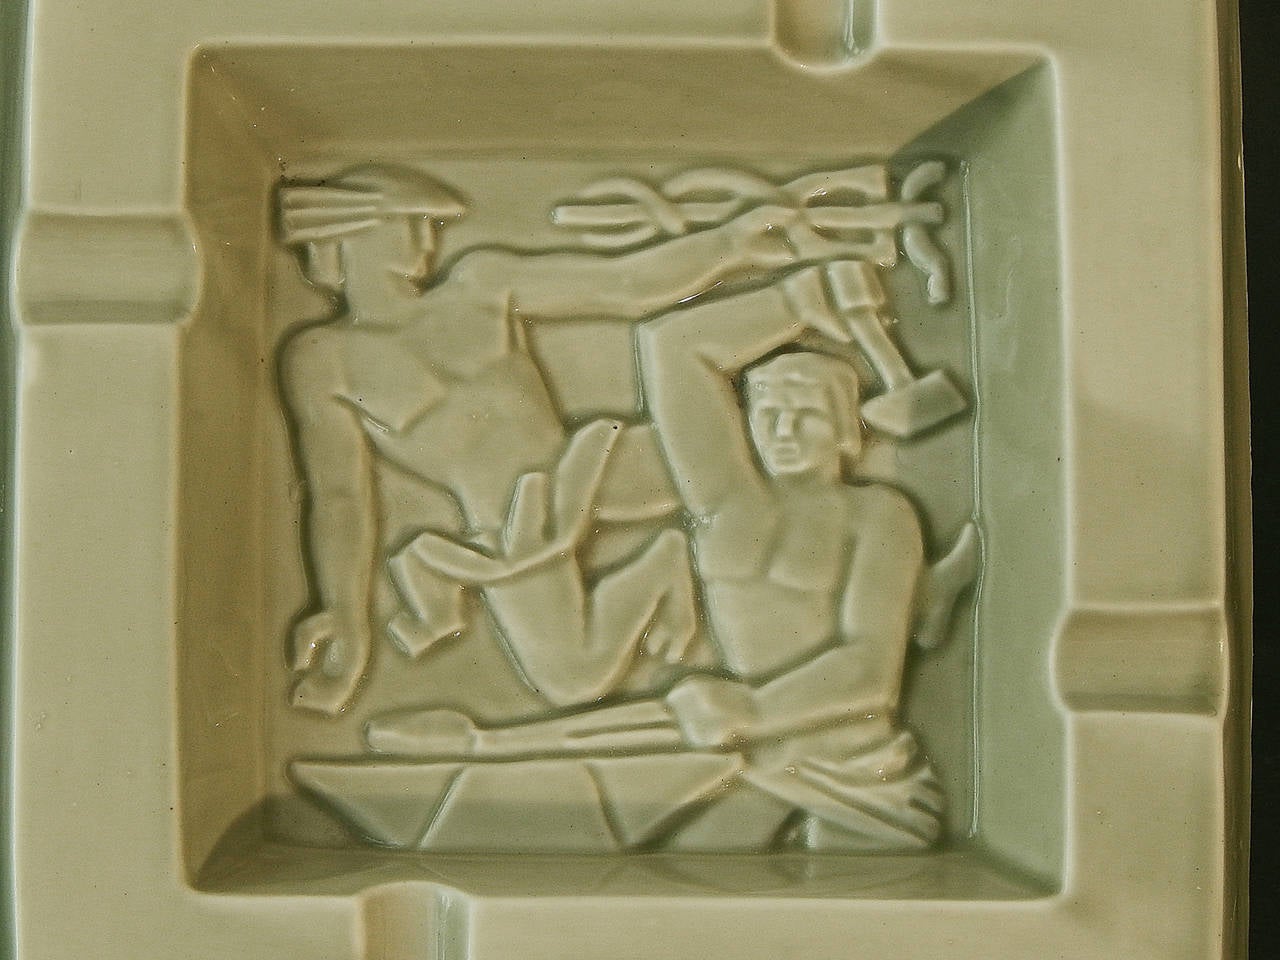 Rare and striking, this Art Deco ceramic dish/ashtray depicts, in bas relief, stylized figures of Mercury and Vulcan, constituting the logo of the Fernand-Belliard forge in Bordeaux, France. The logo, also used on the firm's letterhead and other